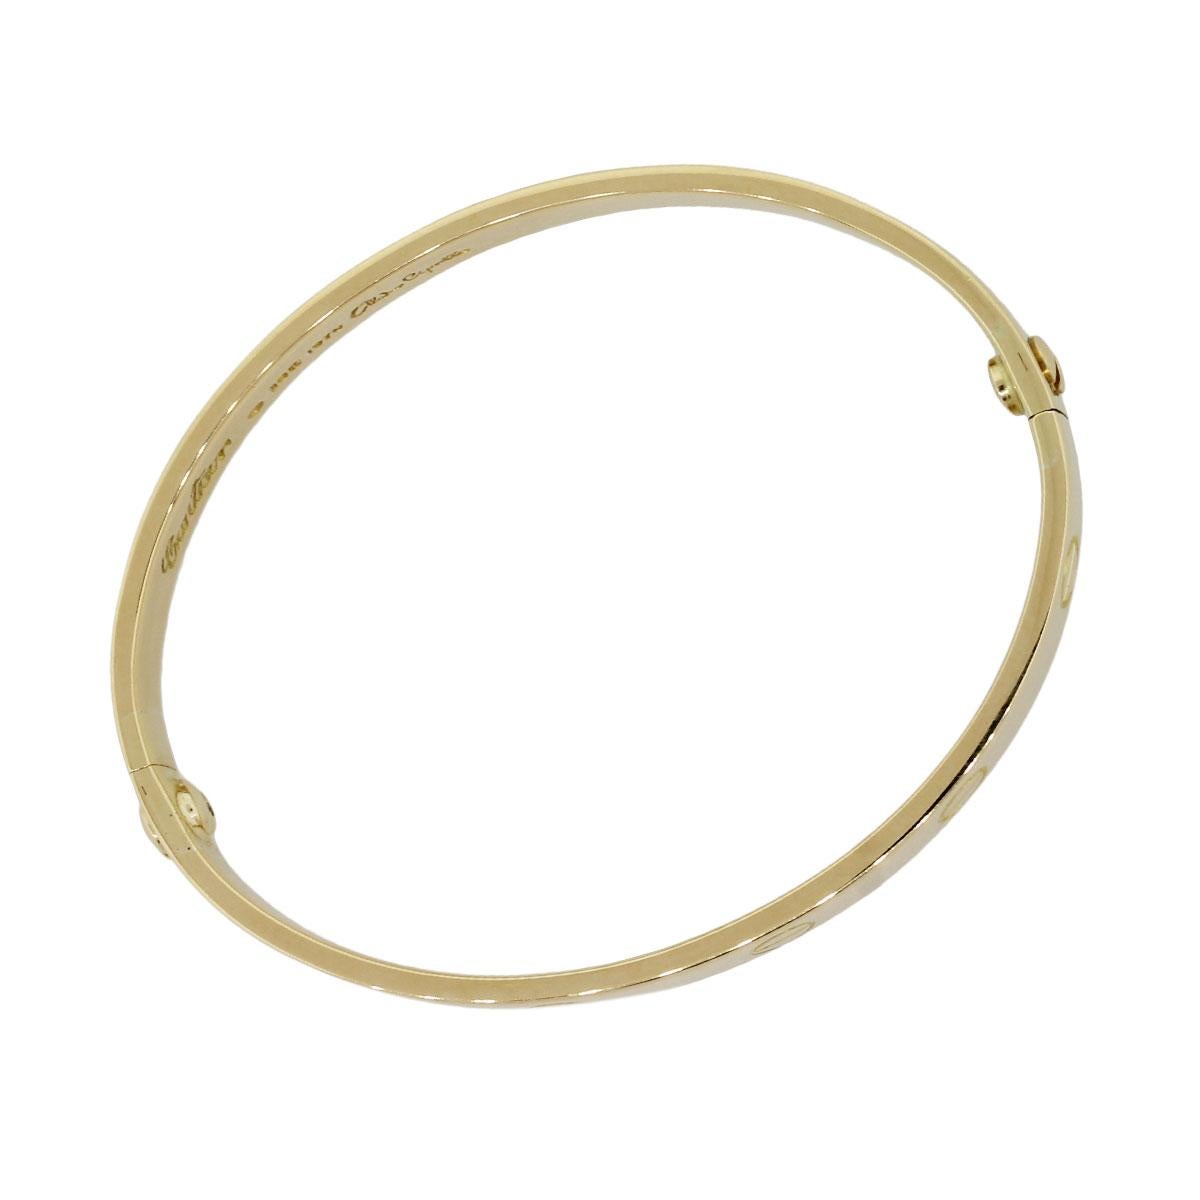 Designer: Cartier, Aldo Cipullo
Material: 18k yellow gold
Total Weight: 30.6g (19.7dwt)
Bracelet Measurements: Will fit a 6.25″ wrist, Cartier Size 16
Clasp Details: Screw
Additional Details: Item comes complete with a presentation box!
SKU: G8628